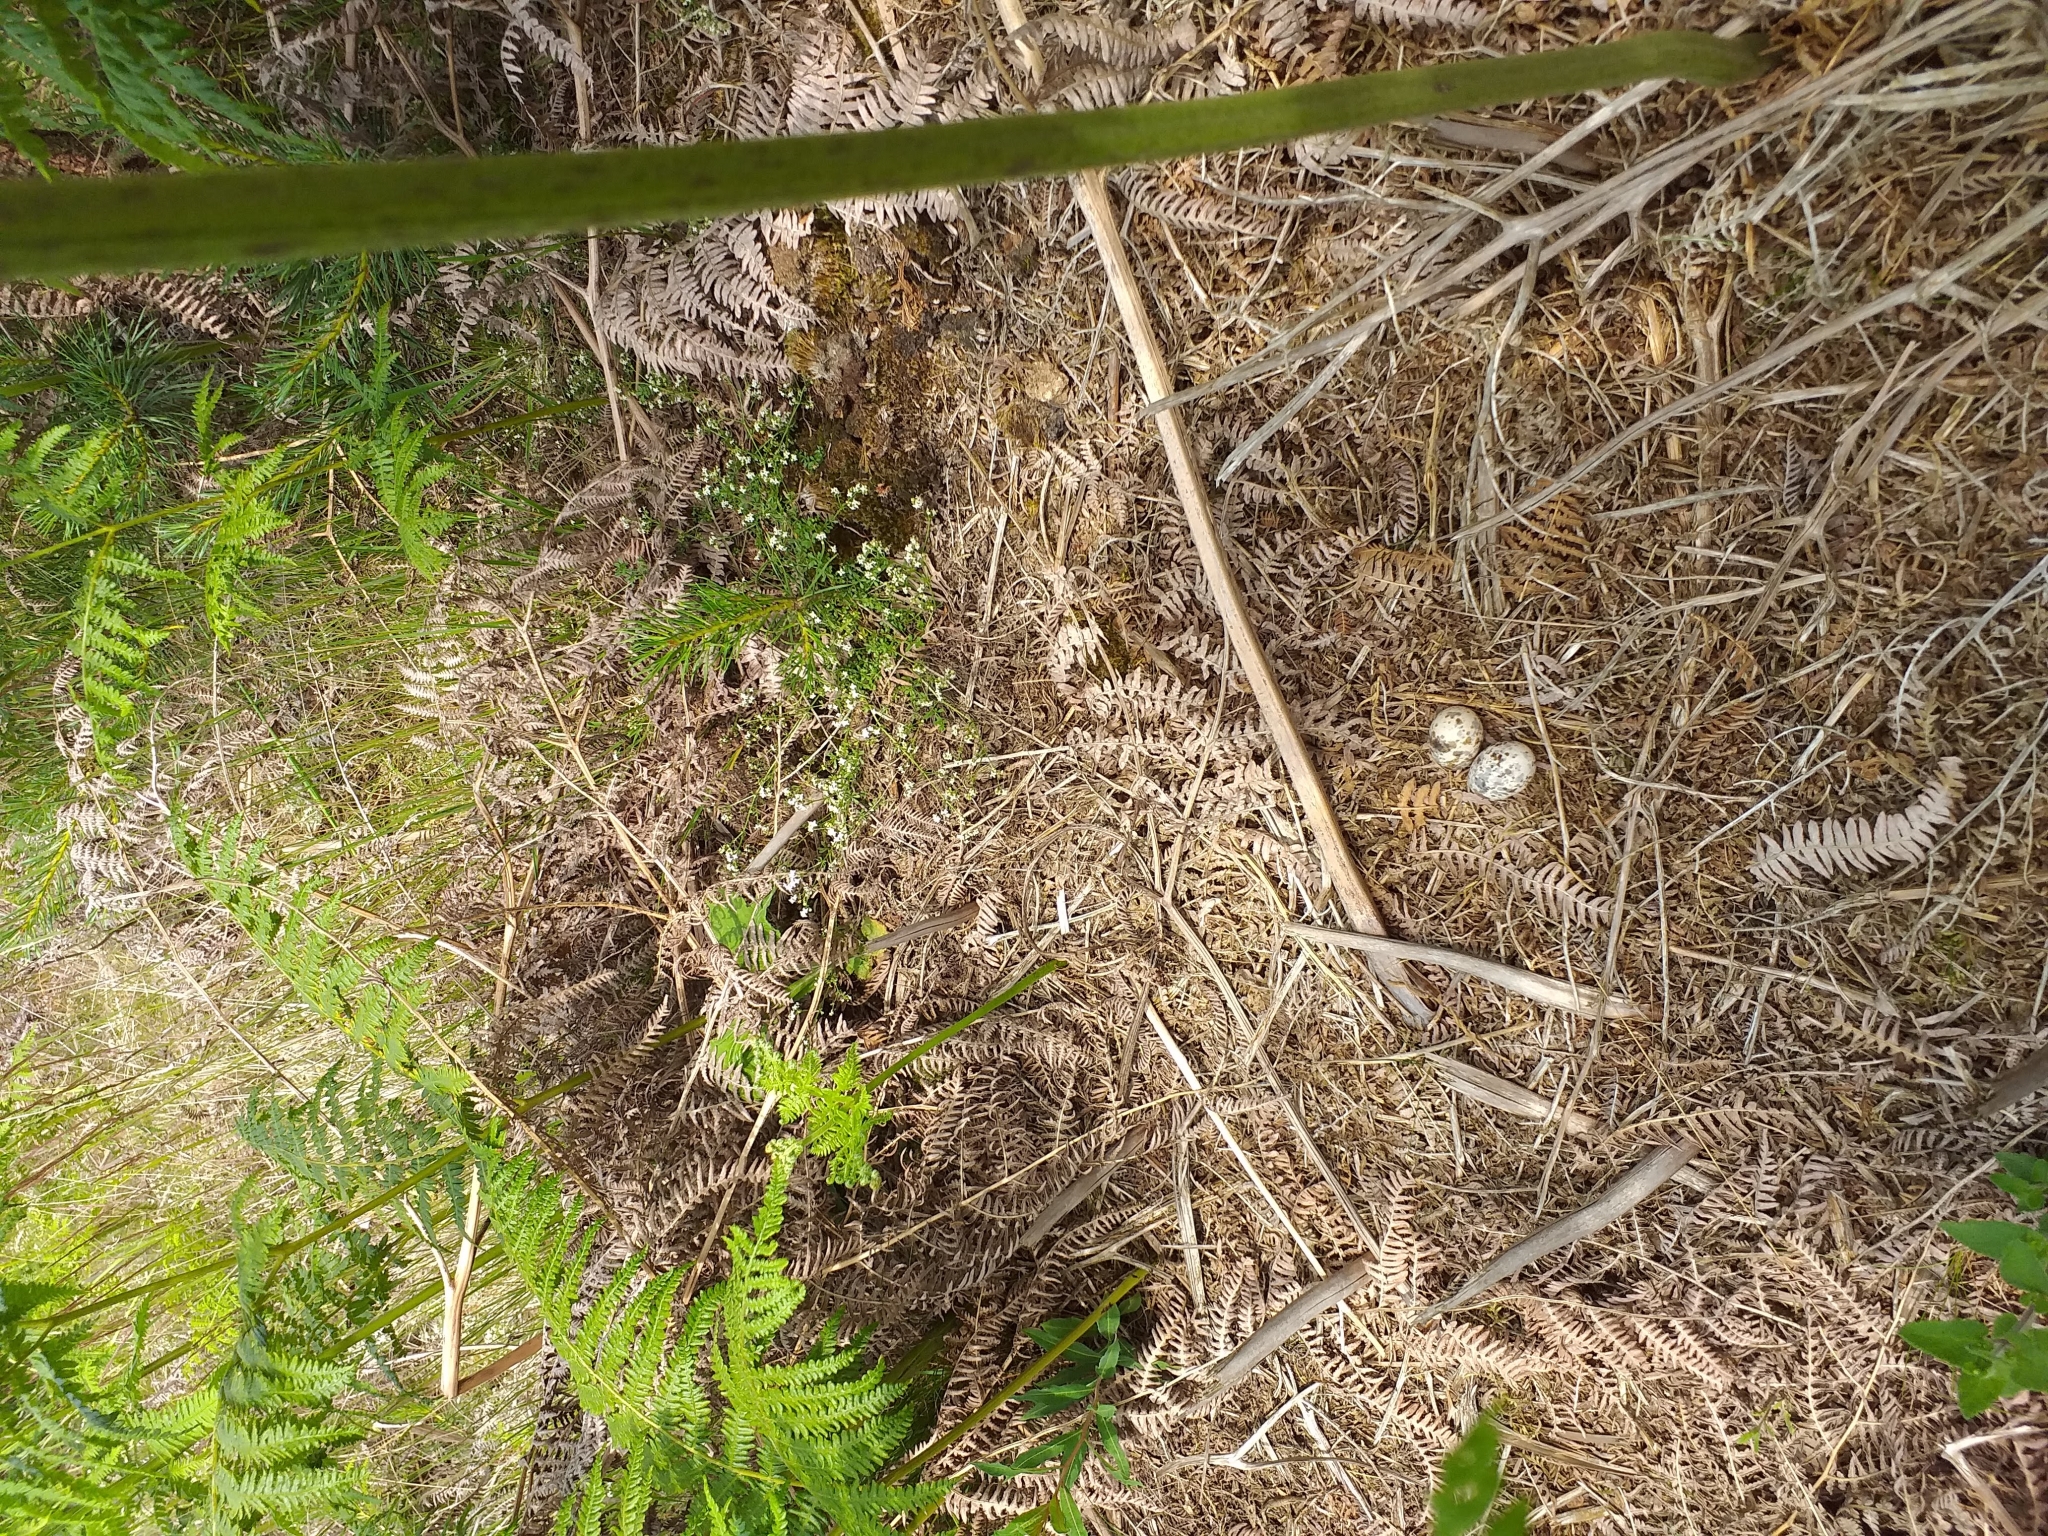 A photo from the FoTF Conservation Event - June 2019 - Nightjar Nest Hunt with members of the BTO - British Trust for Ornithology : A Nightjar nest, with some eggs